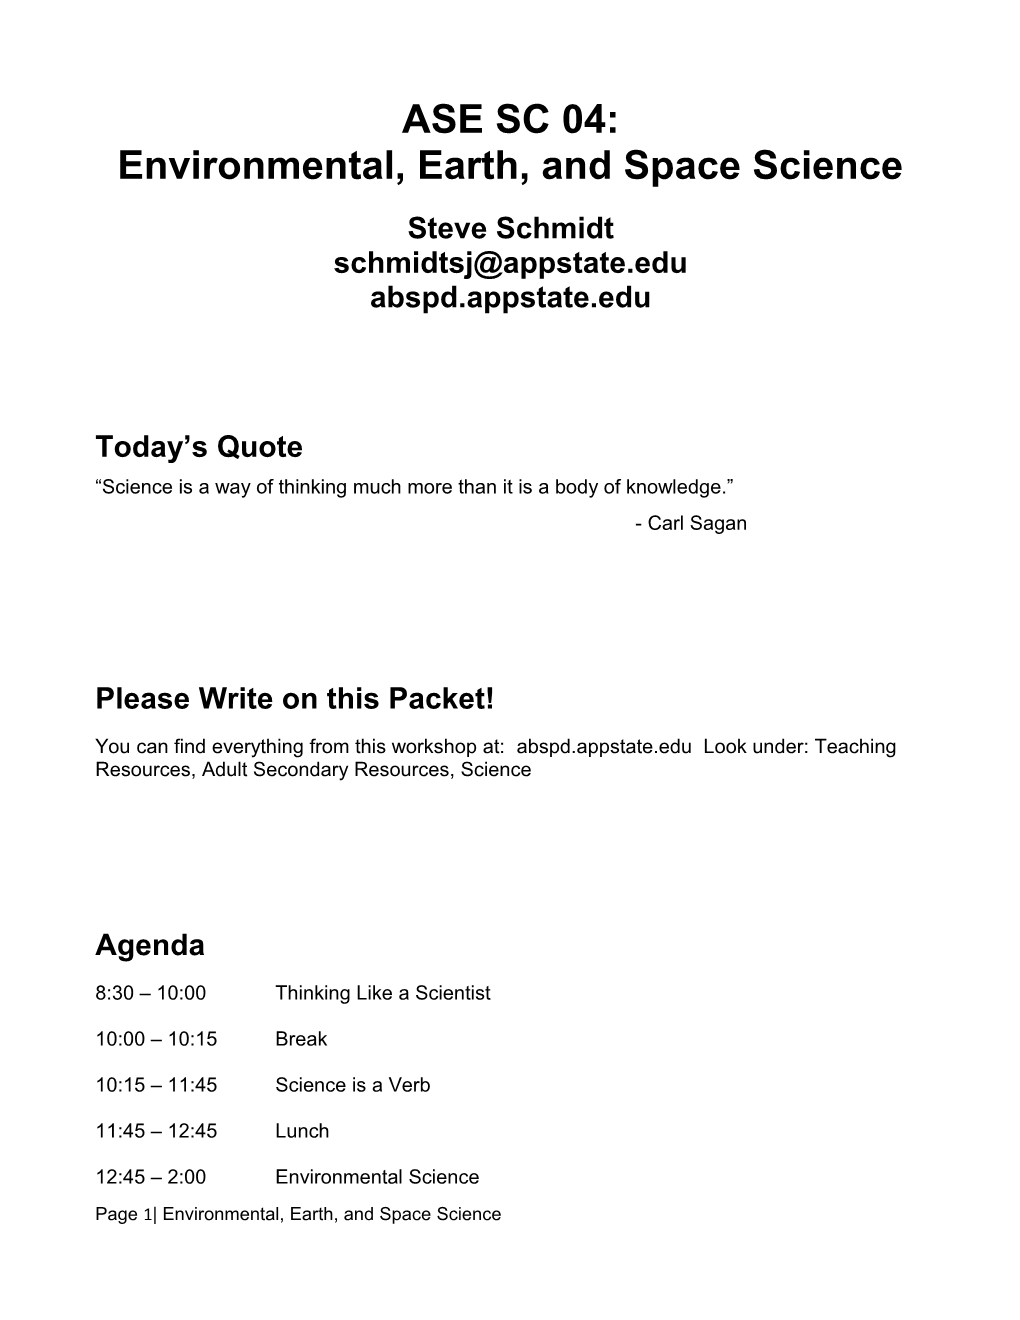 Environmental, Earth, and Space Science